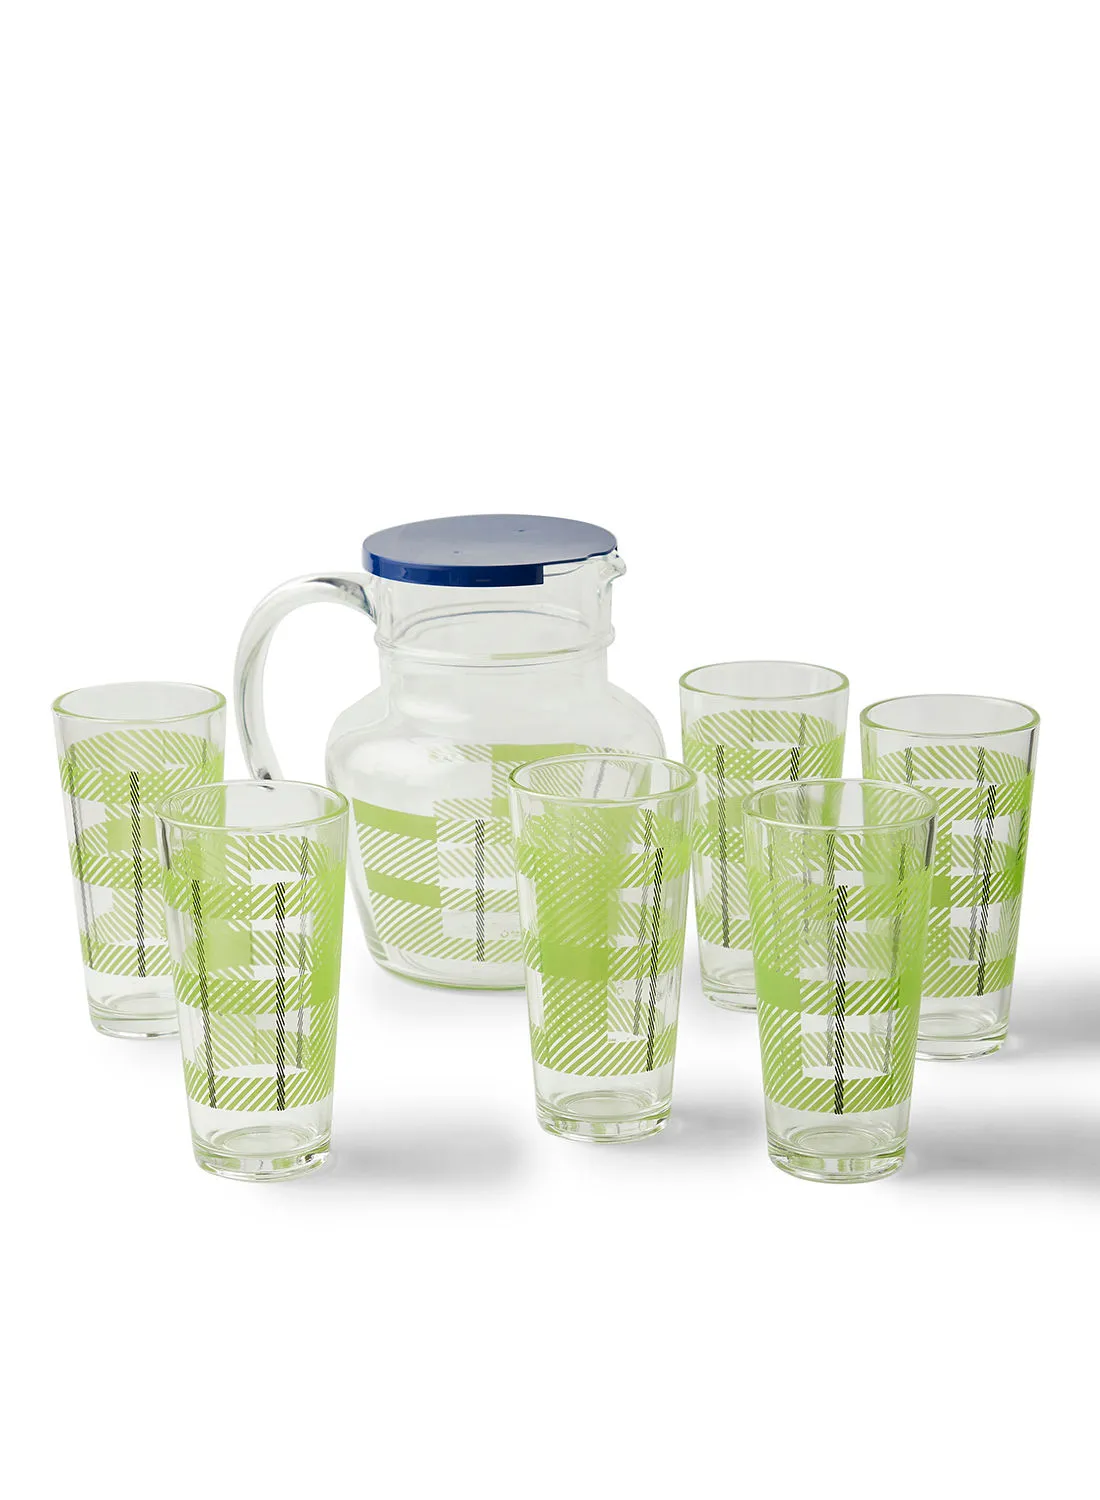 Noon East 7 Piece Glass Drink Set Beverage Glasses For Juices - By Noon East - Jug 1.4 L, Tumblers 27 Cl - Serves 6 - CelticGreen 1 x Jug: 1.4 L + 6 x Tumblers: 270ml